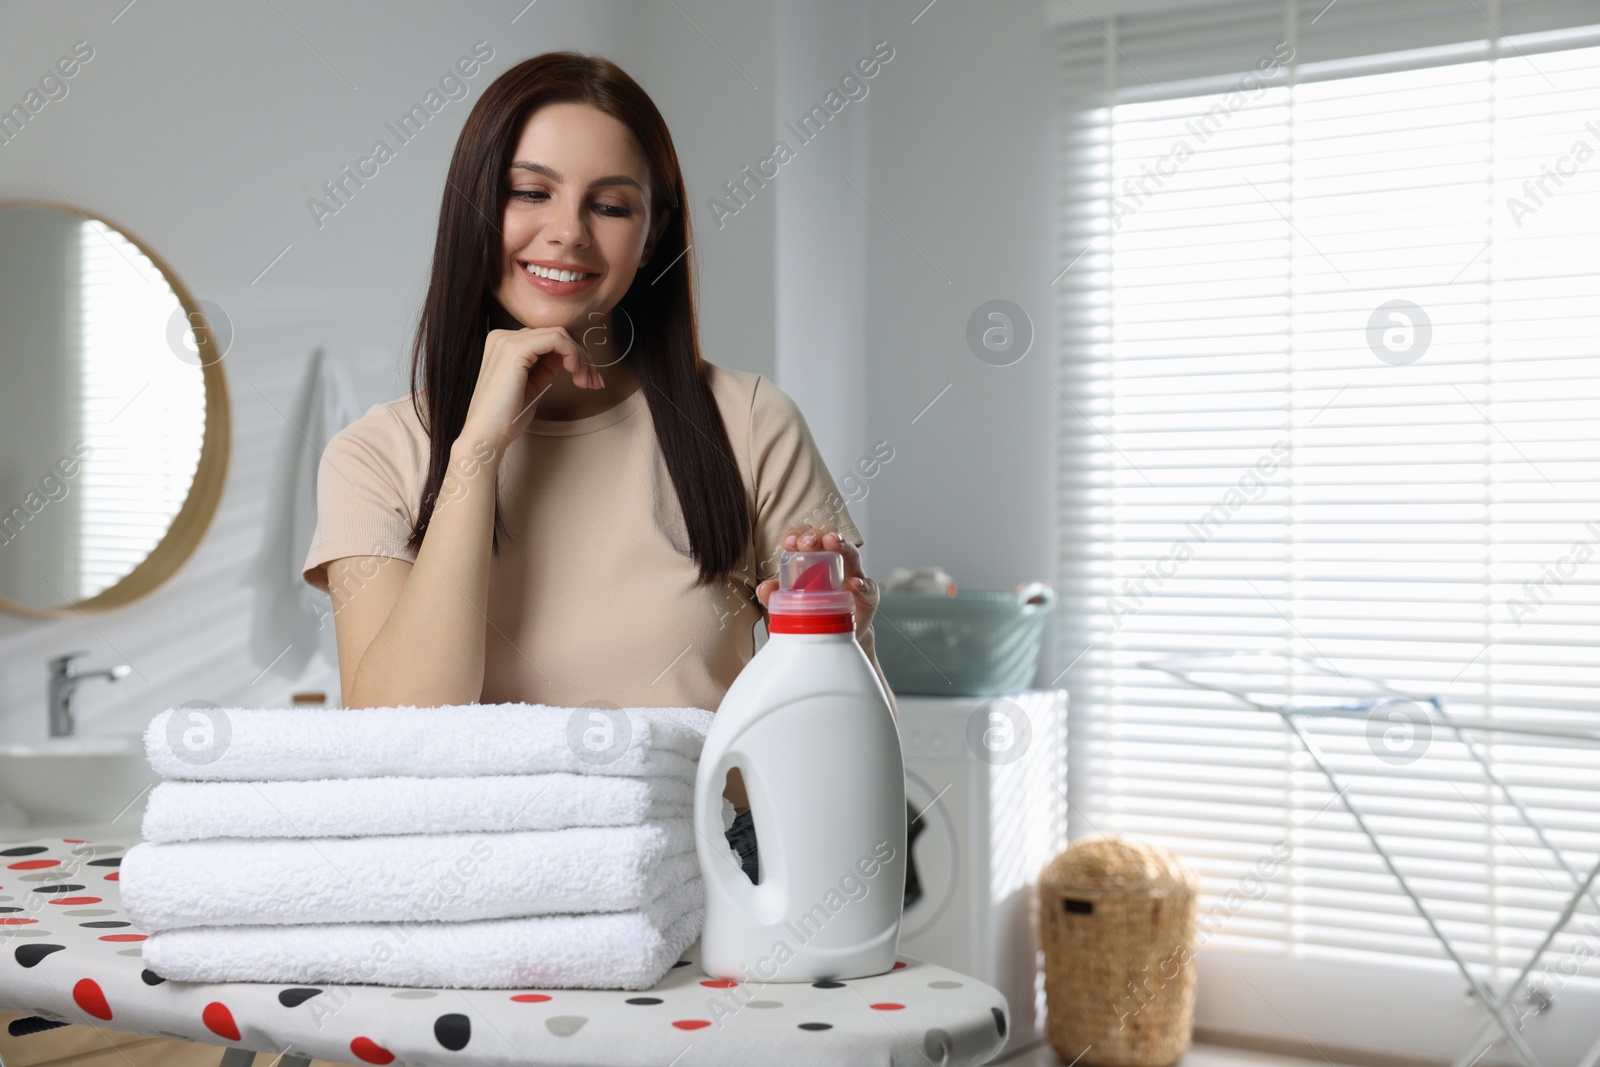 Photo of Woman near fabric softener and clean towels in bathroom, space for text